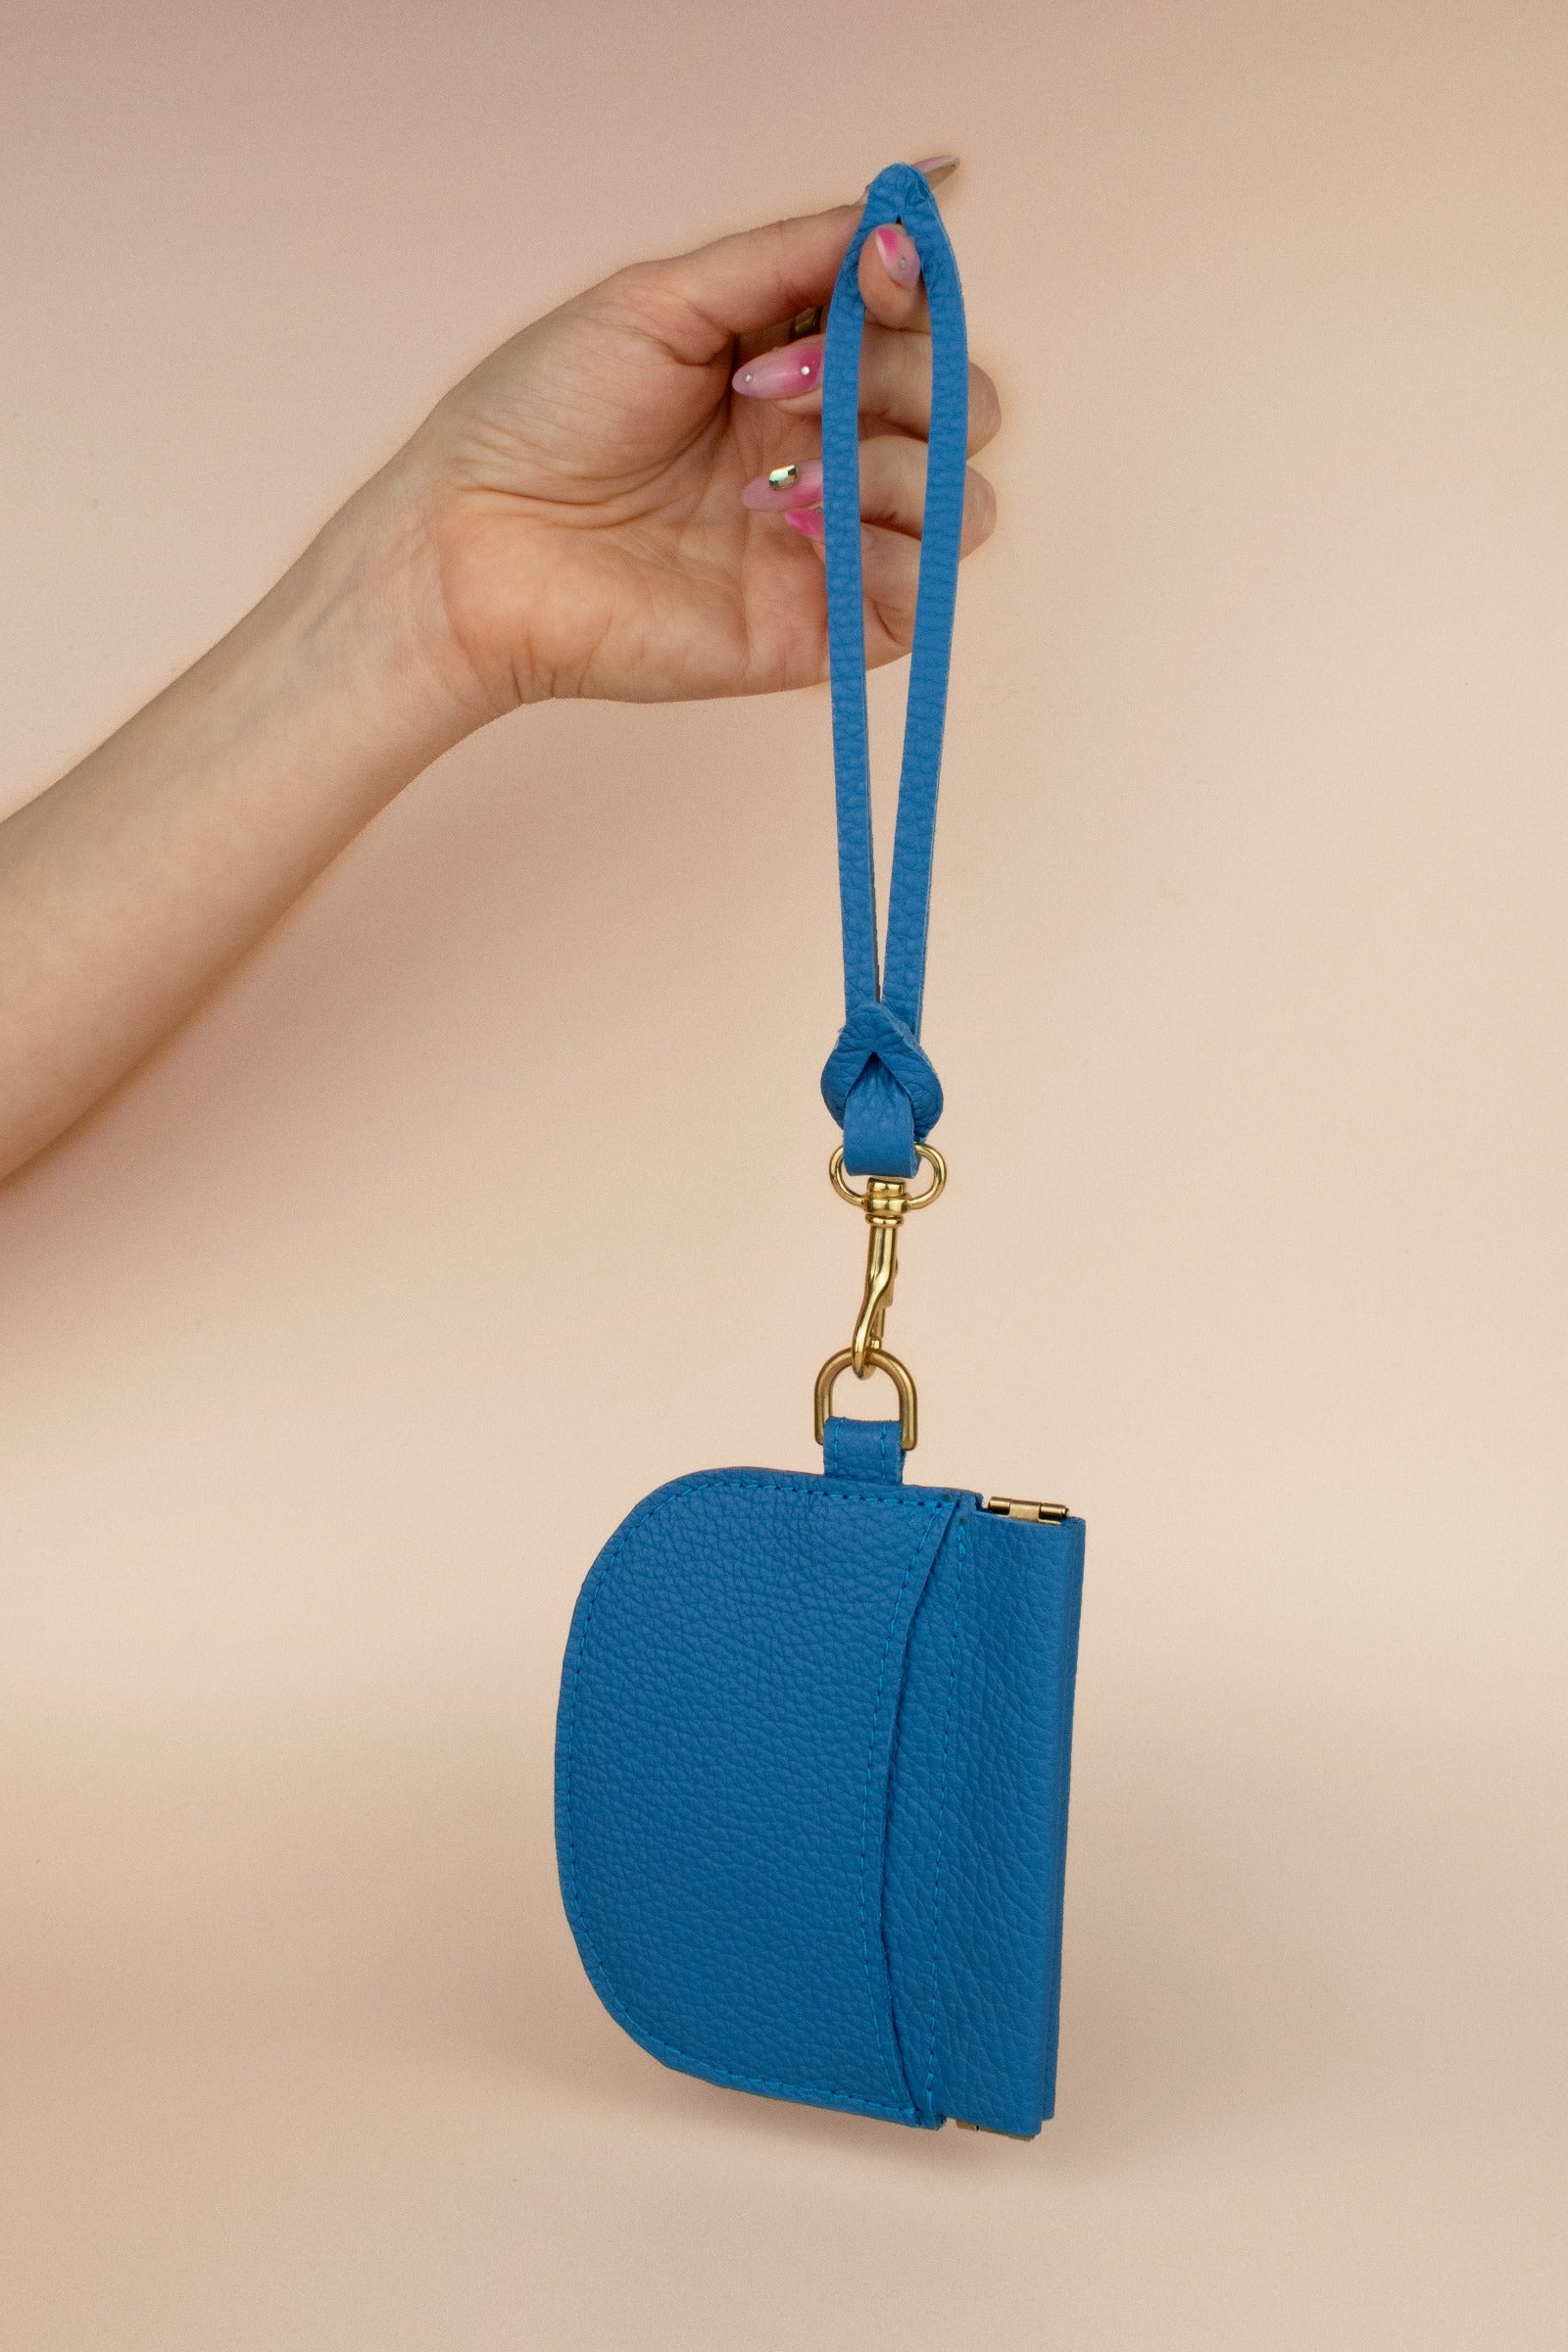 small leather women's wristlet in matisse blue with detachable keychain attachments, small card case gift for third anniversary